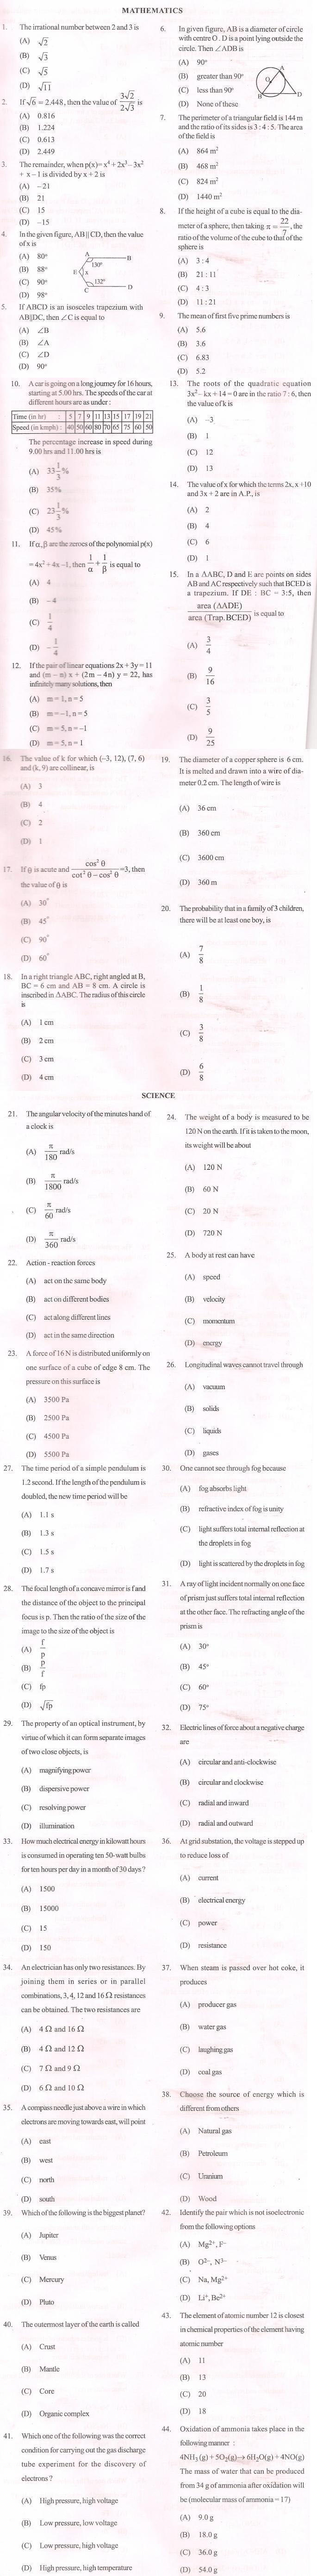 APJEE 2012 Question Papers - Mathematics & Science